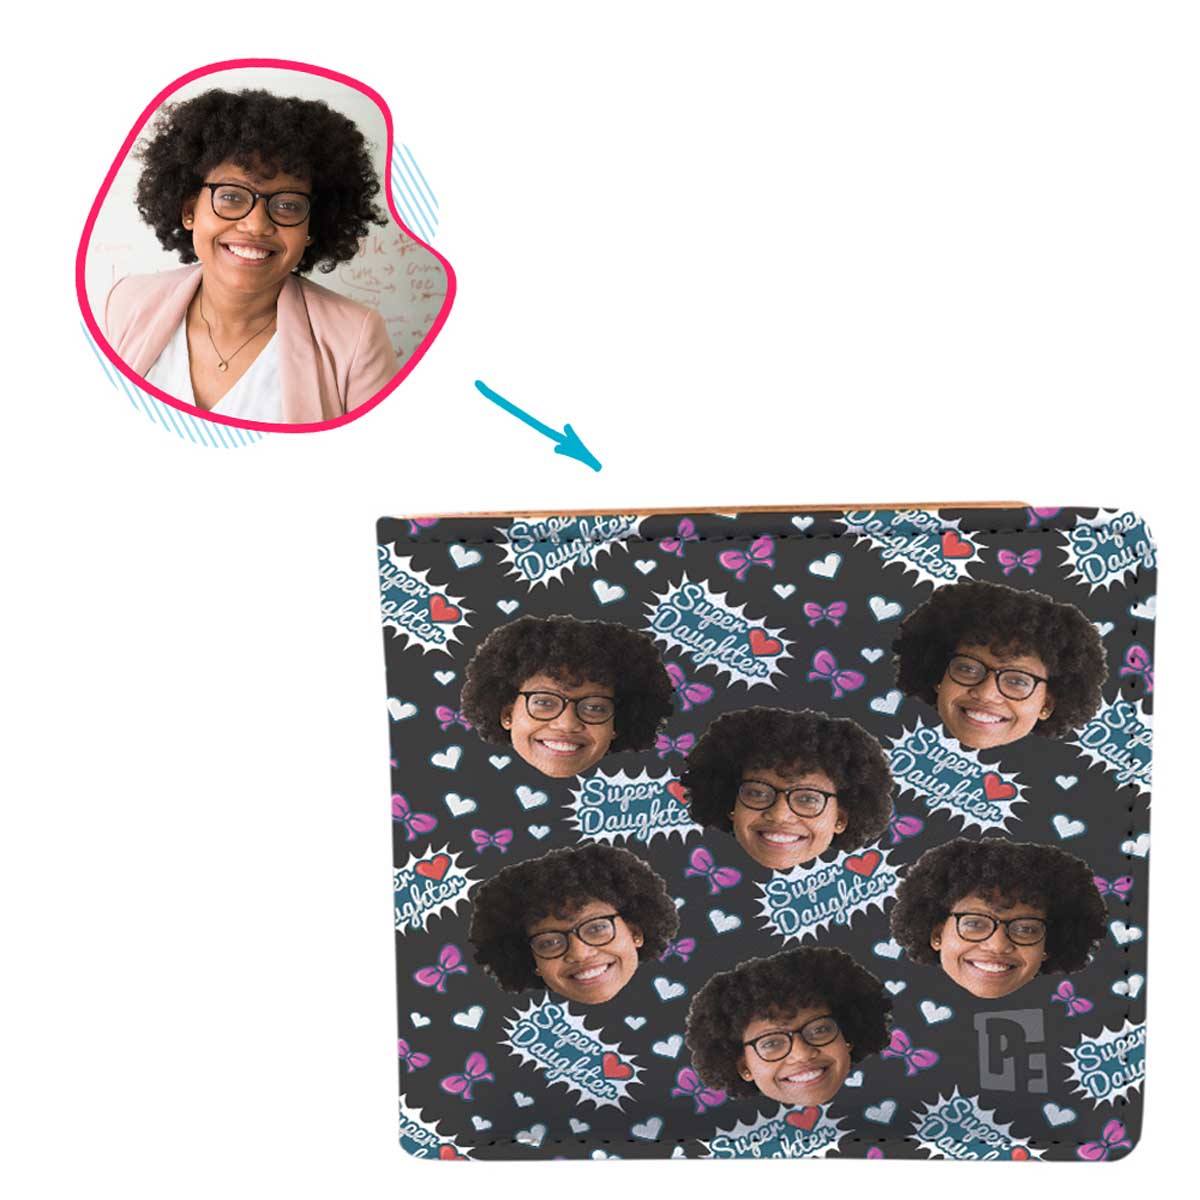 dark Super Daughter wallet personalized with photo of face printed on it